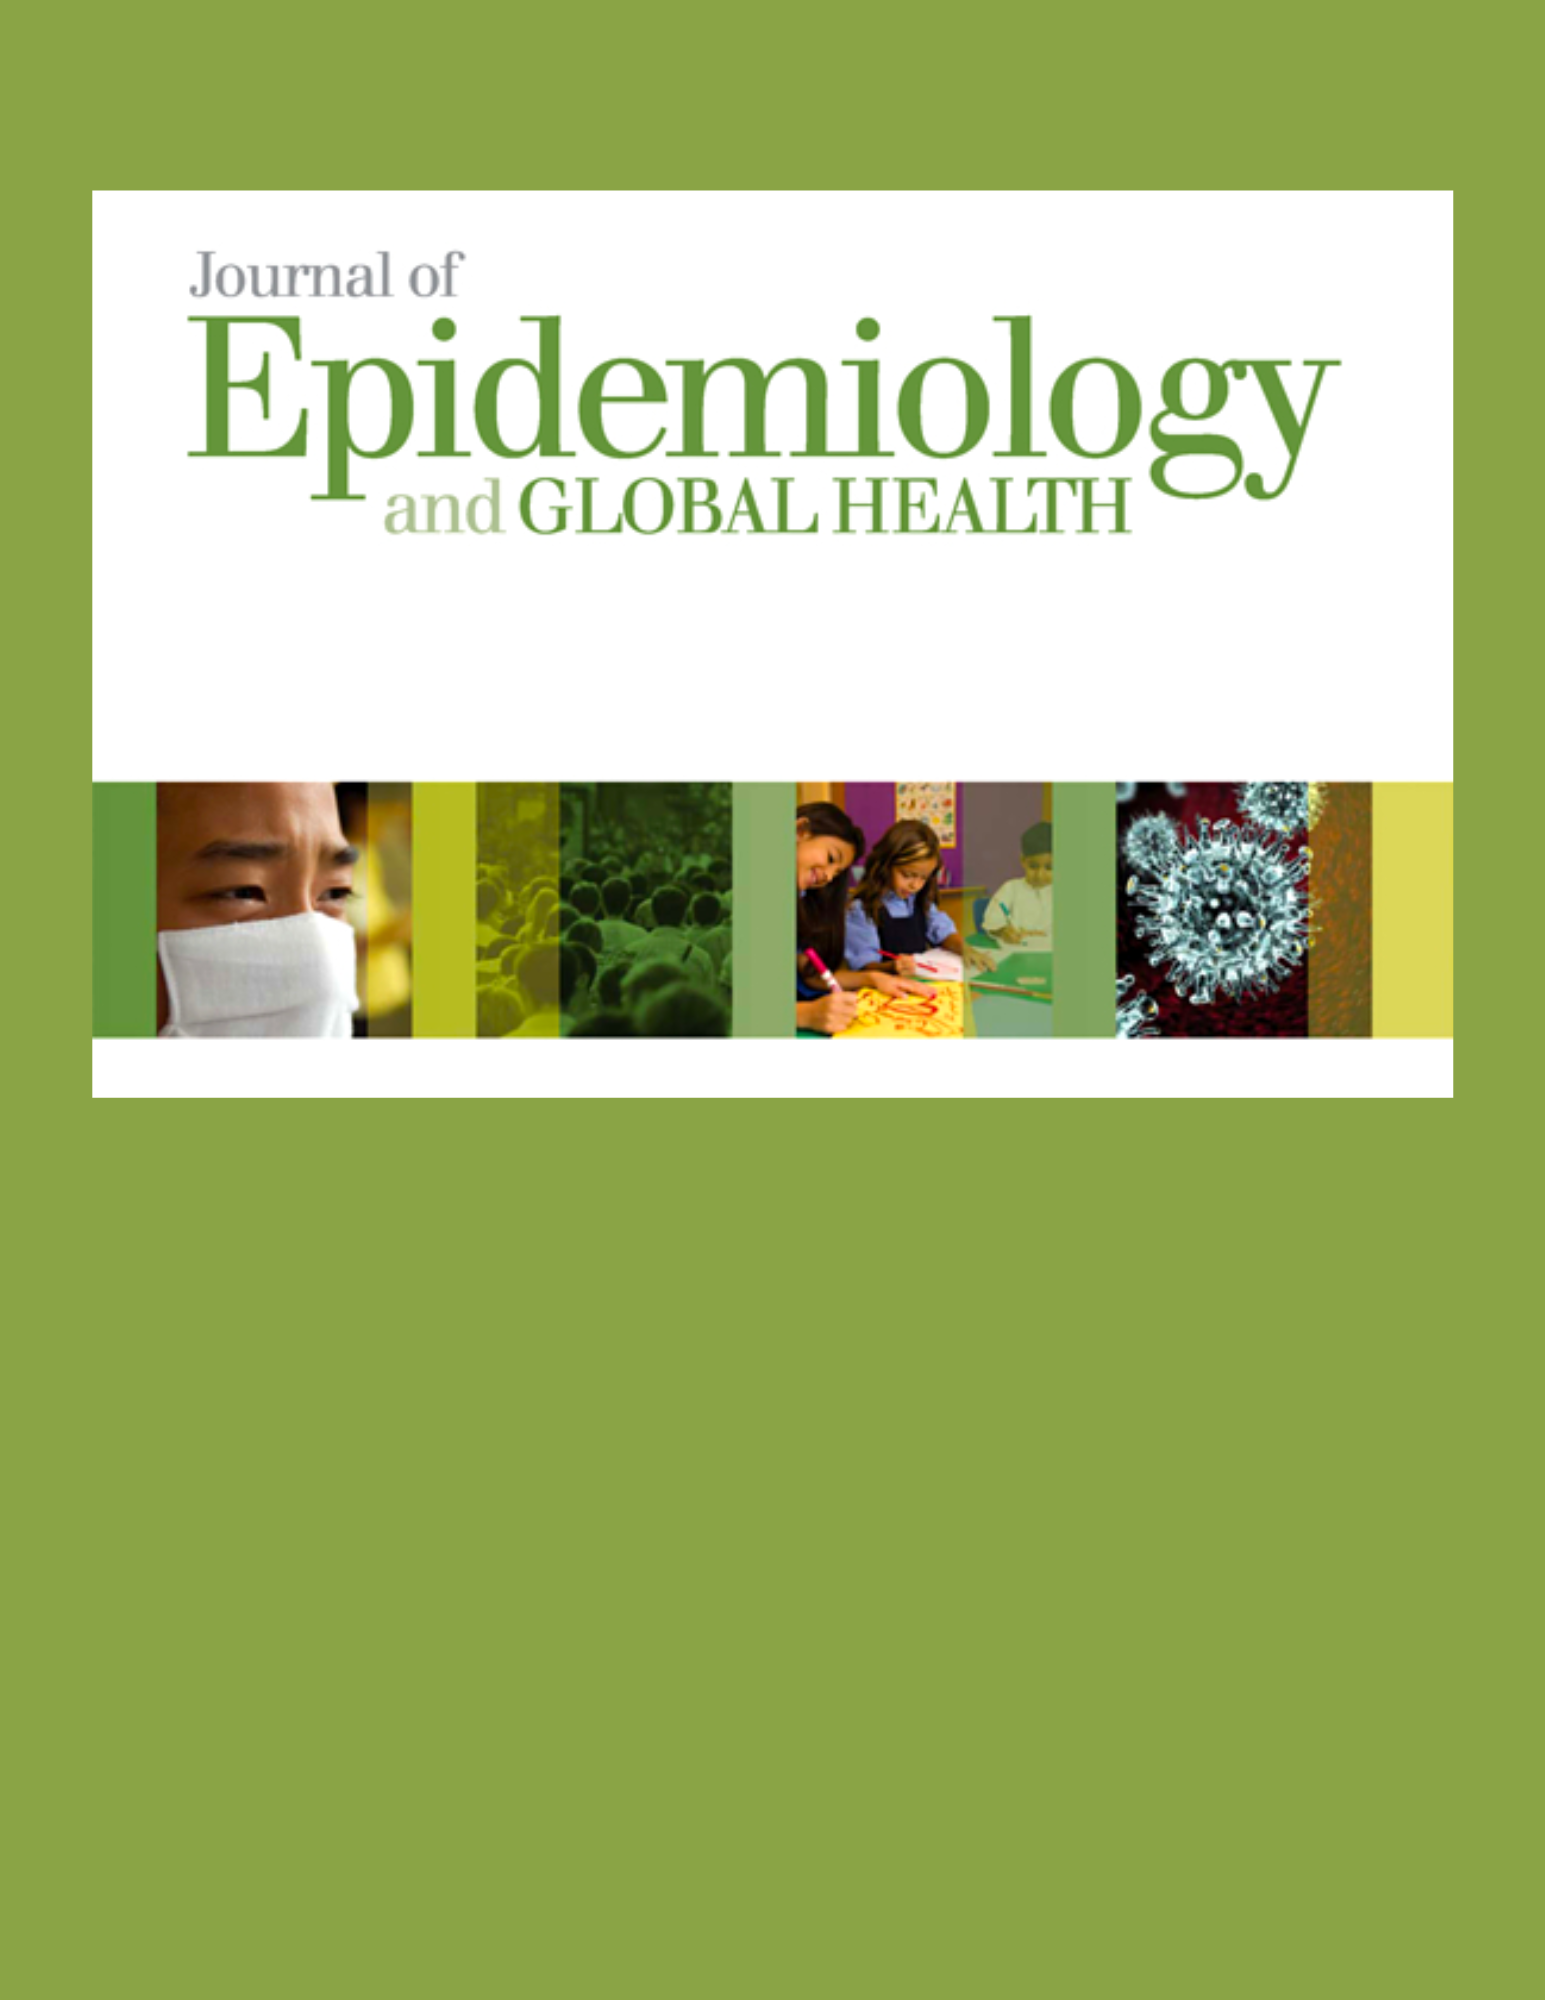 Journal of epidemiology and global health